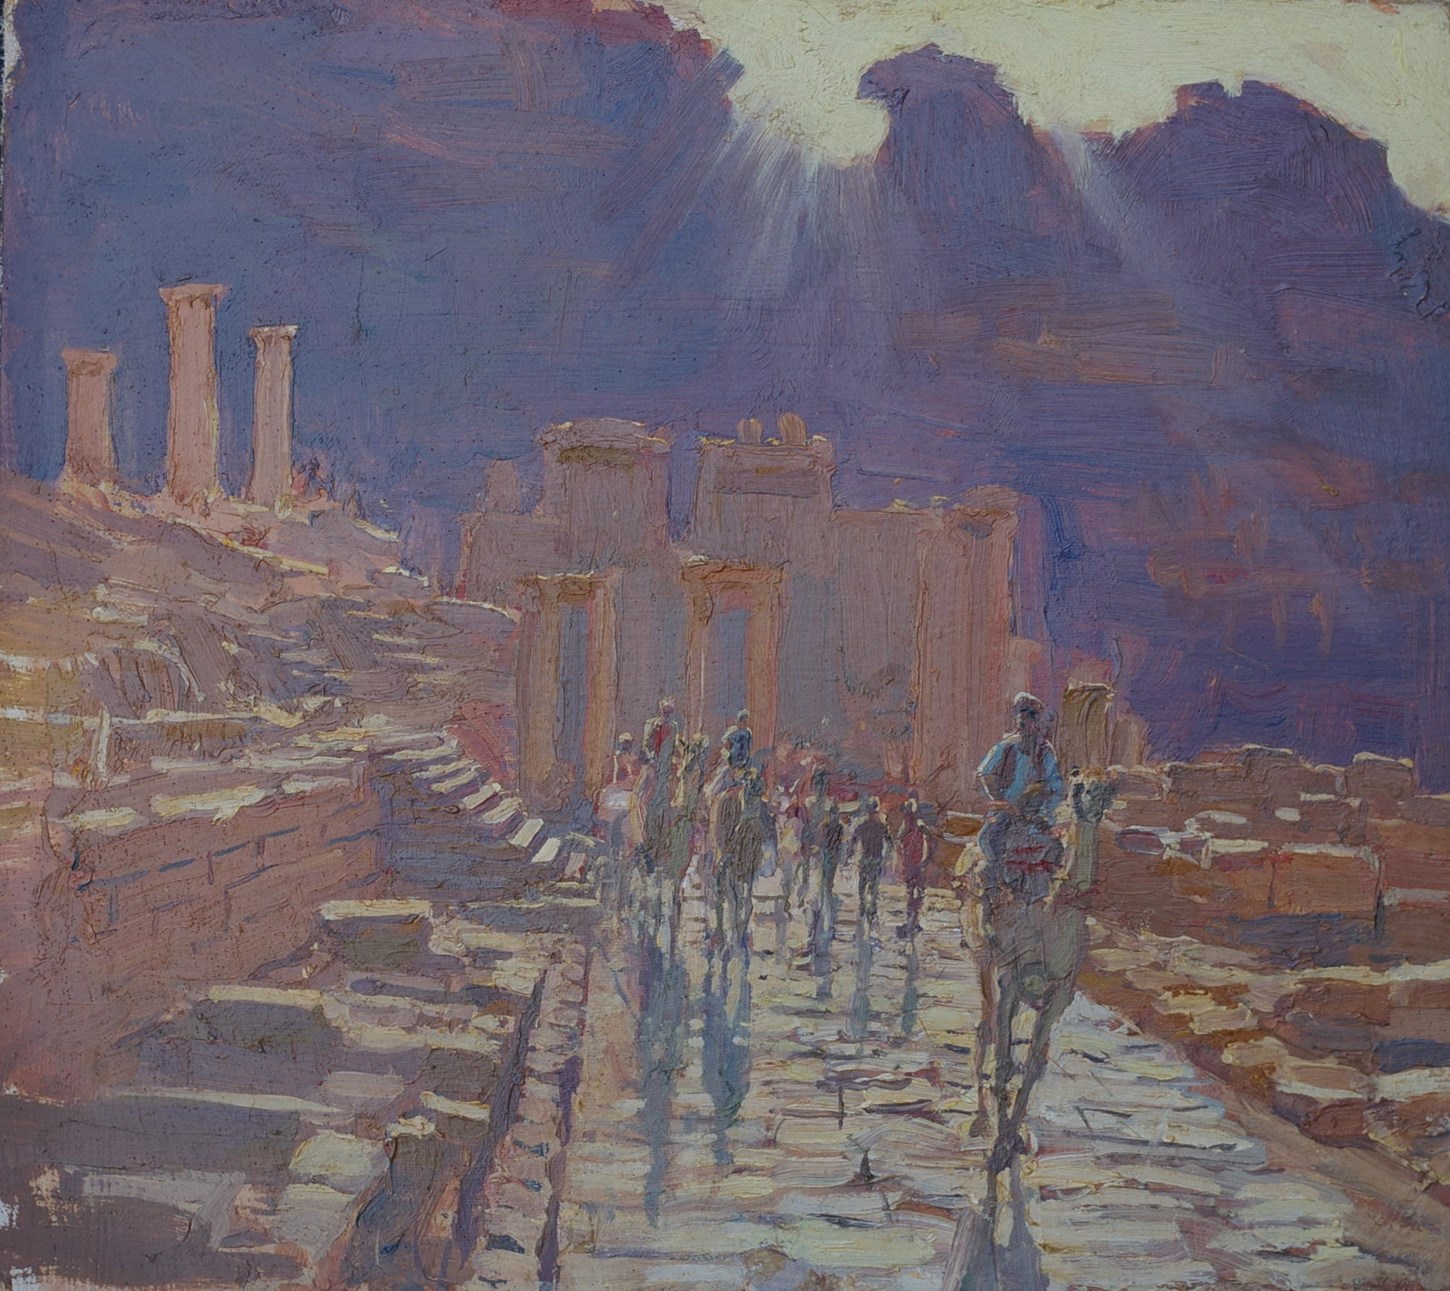 Colonnaded Street, Petra